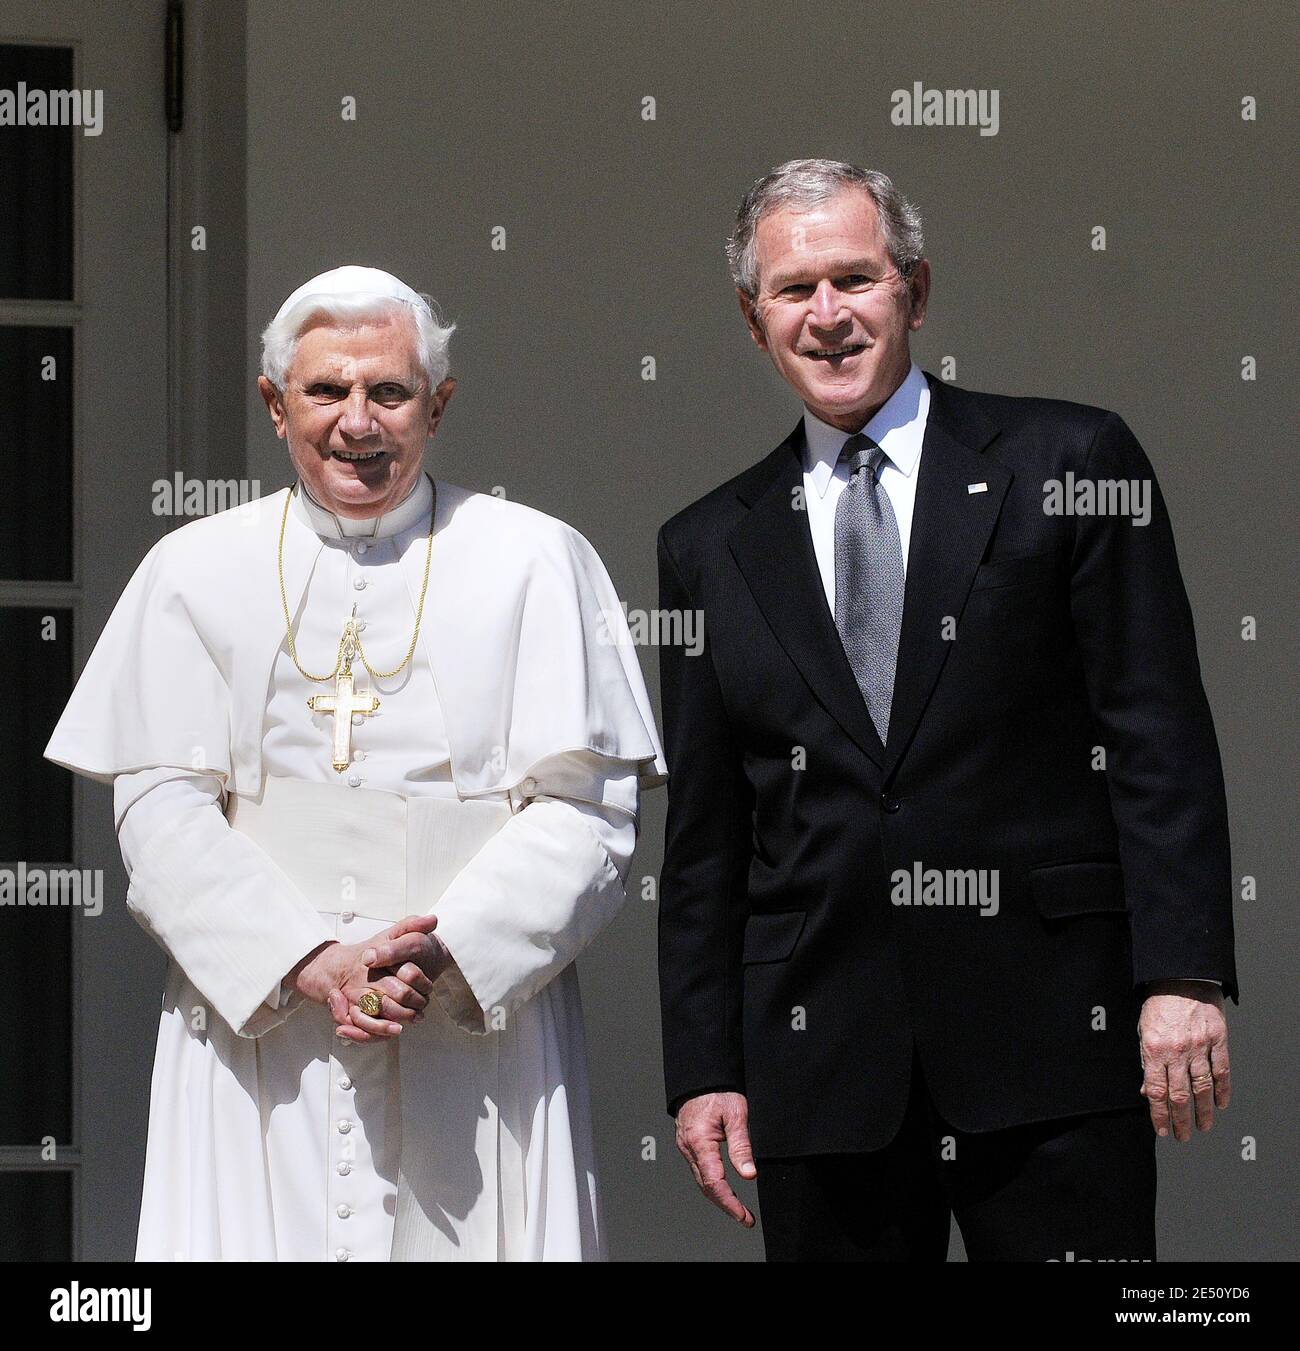 US President George W. Bush (R) stands with Pope Benedict XVI outside the Oval Office of the White House in Washington, DC, USA, on April 16, 2008. Photo by Olivier Douliery /ABACAPRESS.COM Stock Photo